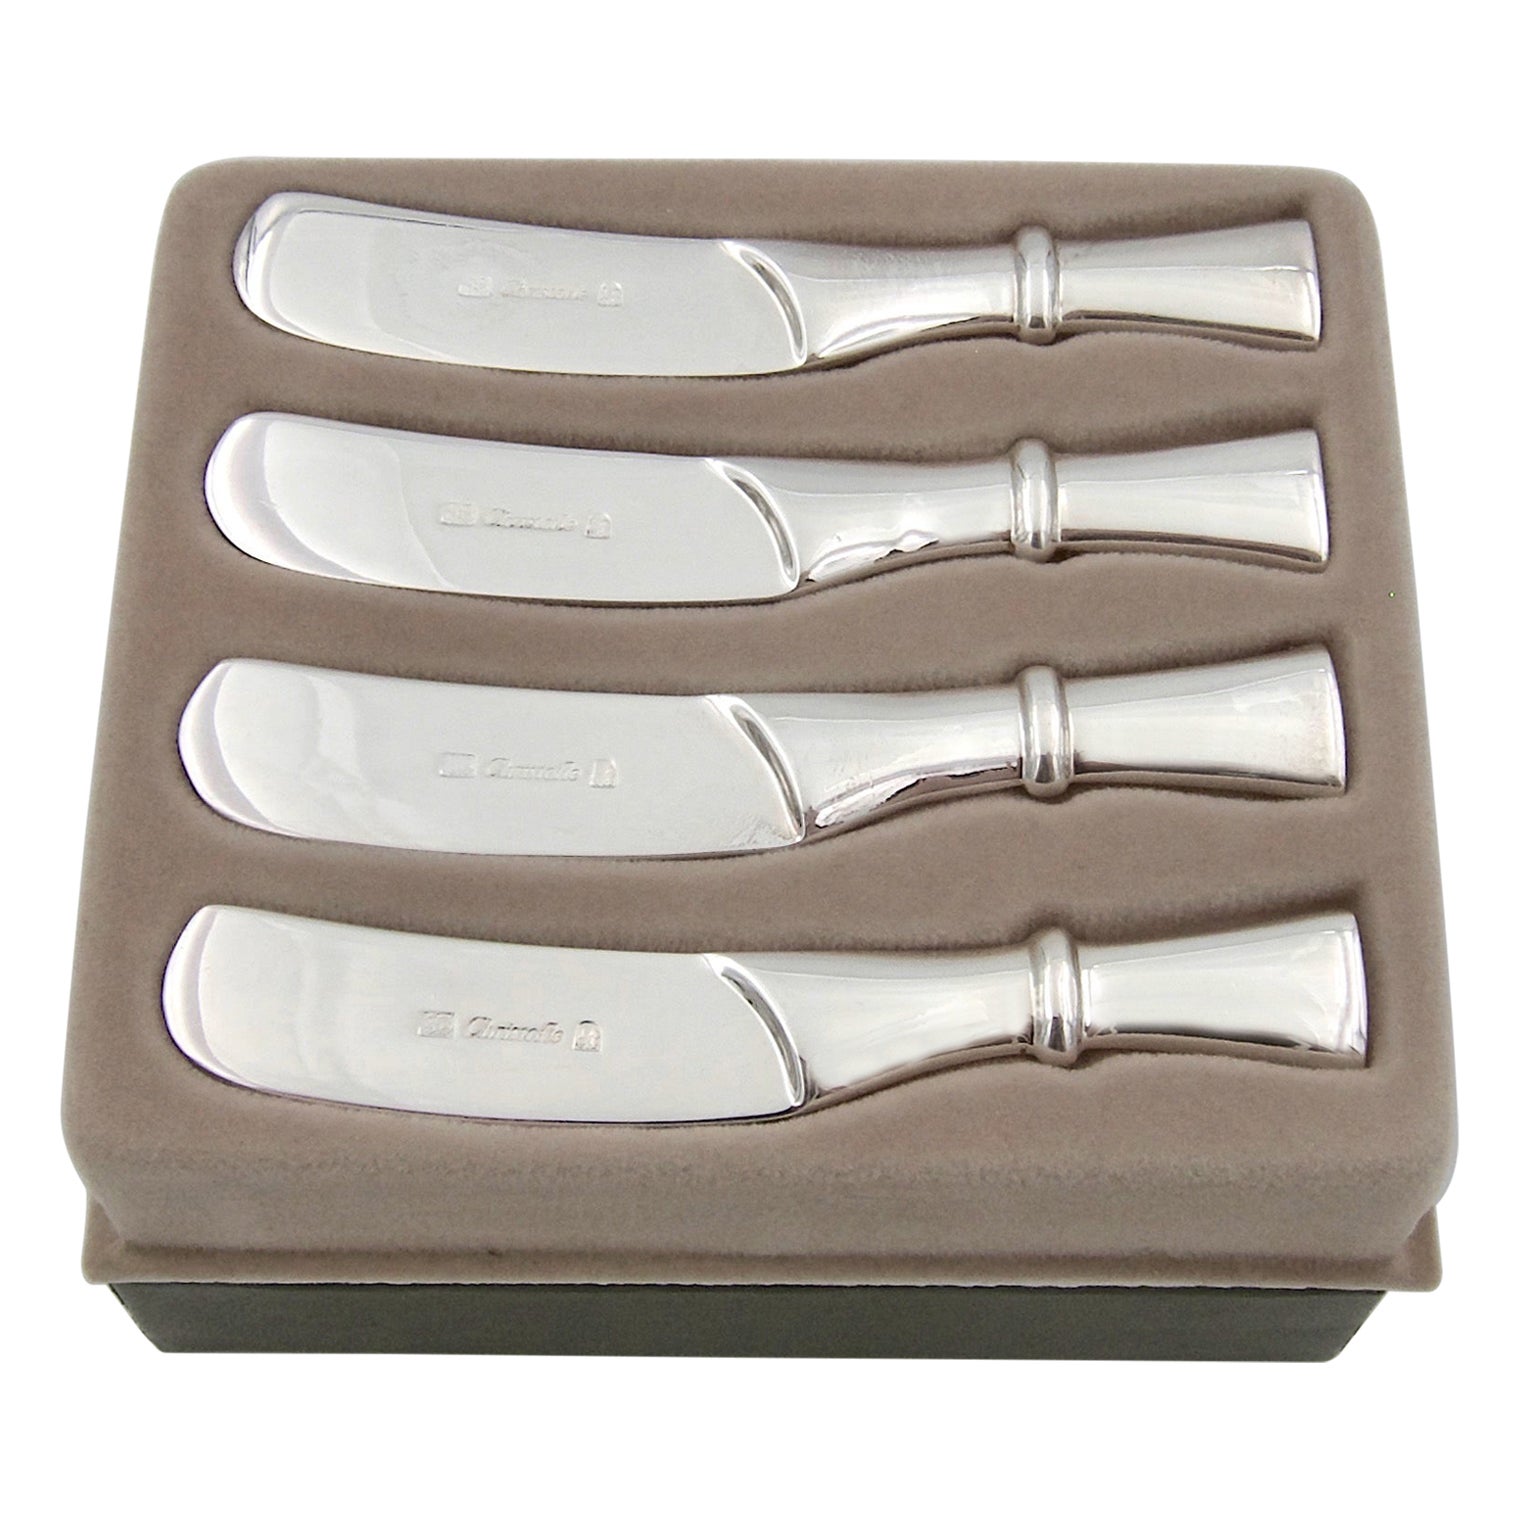 Set of Christofle Silver-Plated Butter Spreader Knives